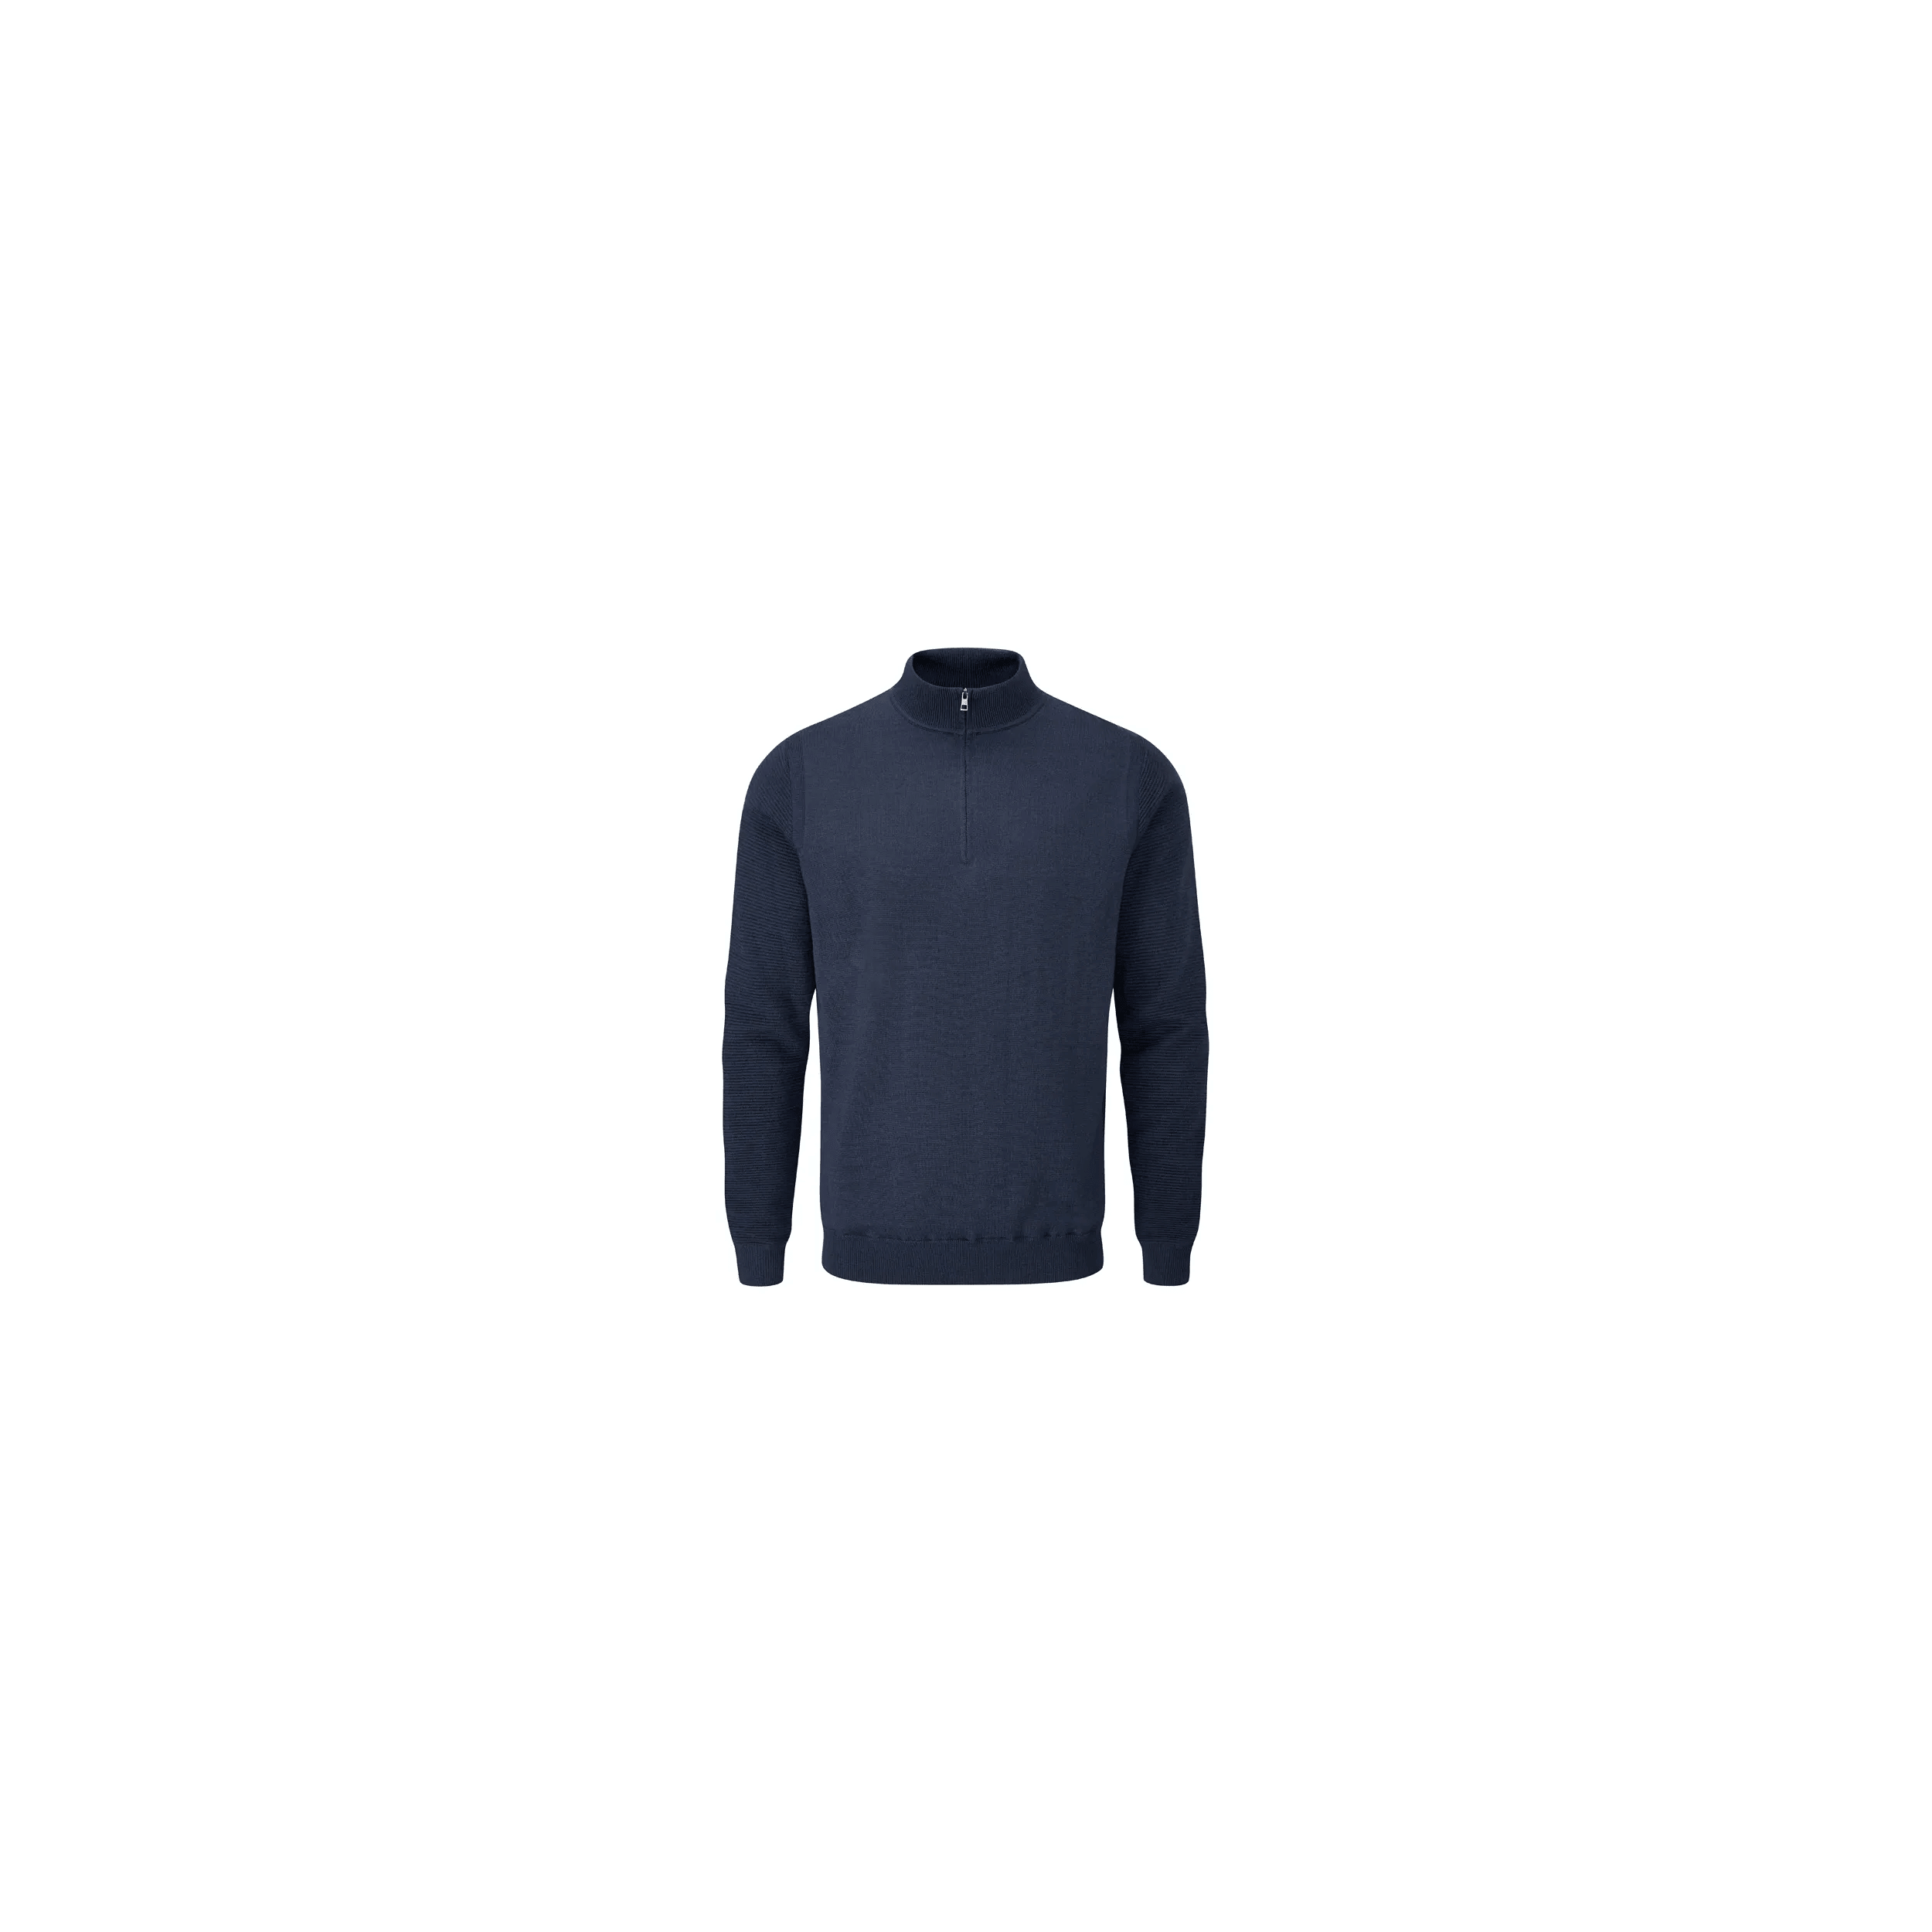 JERSEY PING TÍTULO: CROY MID-LAYER OXFORD BLUE